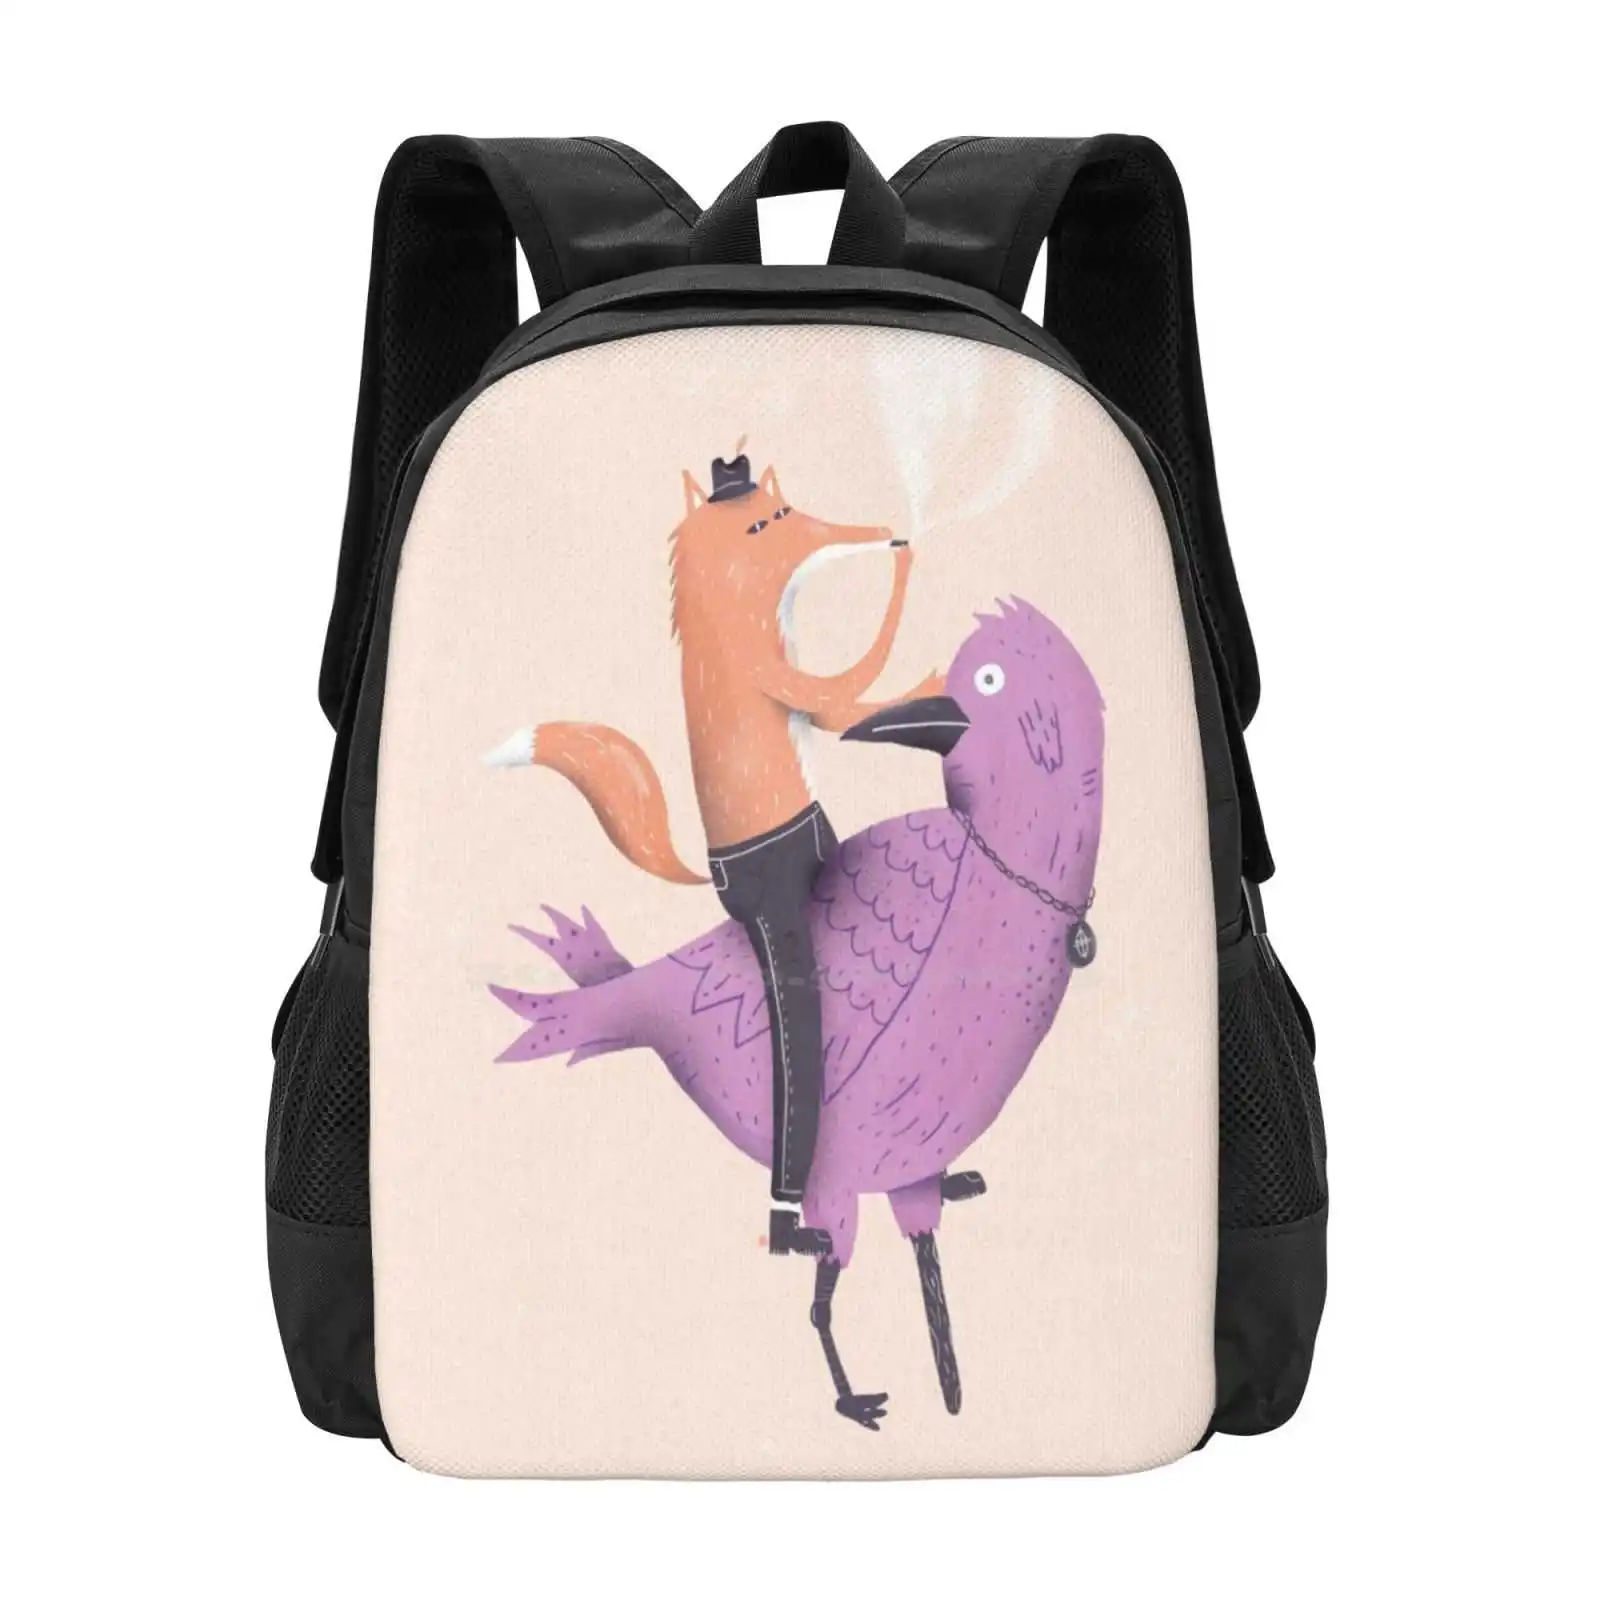 

The Fox And The Bird Teen College Student Backpack Pattern Design Bags Fox Bird Animals Nature Wild